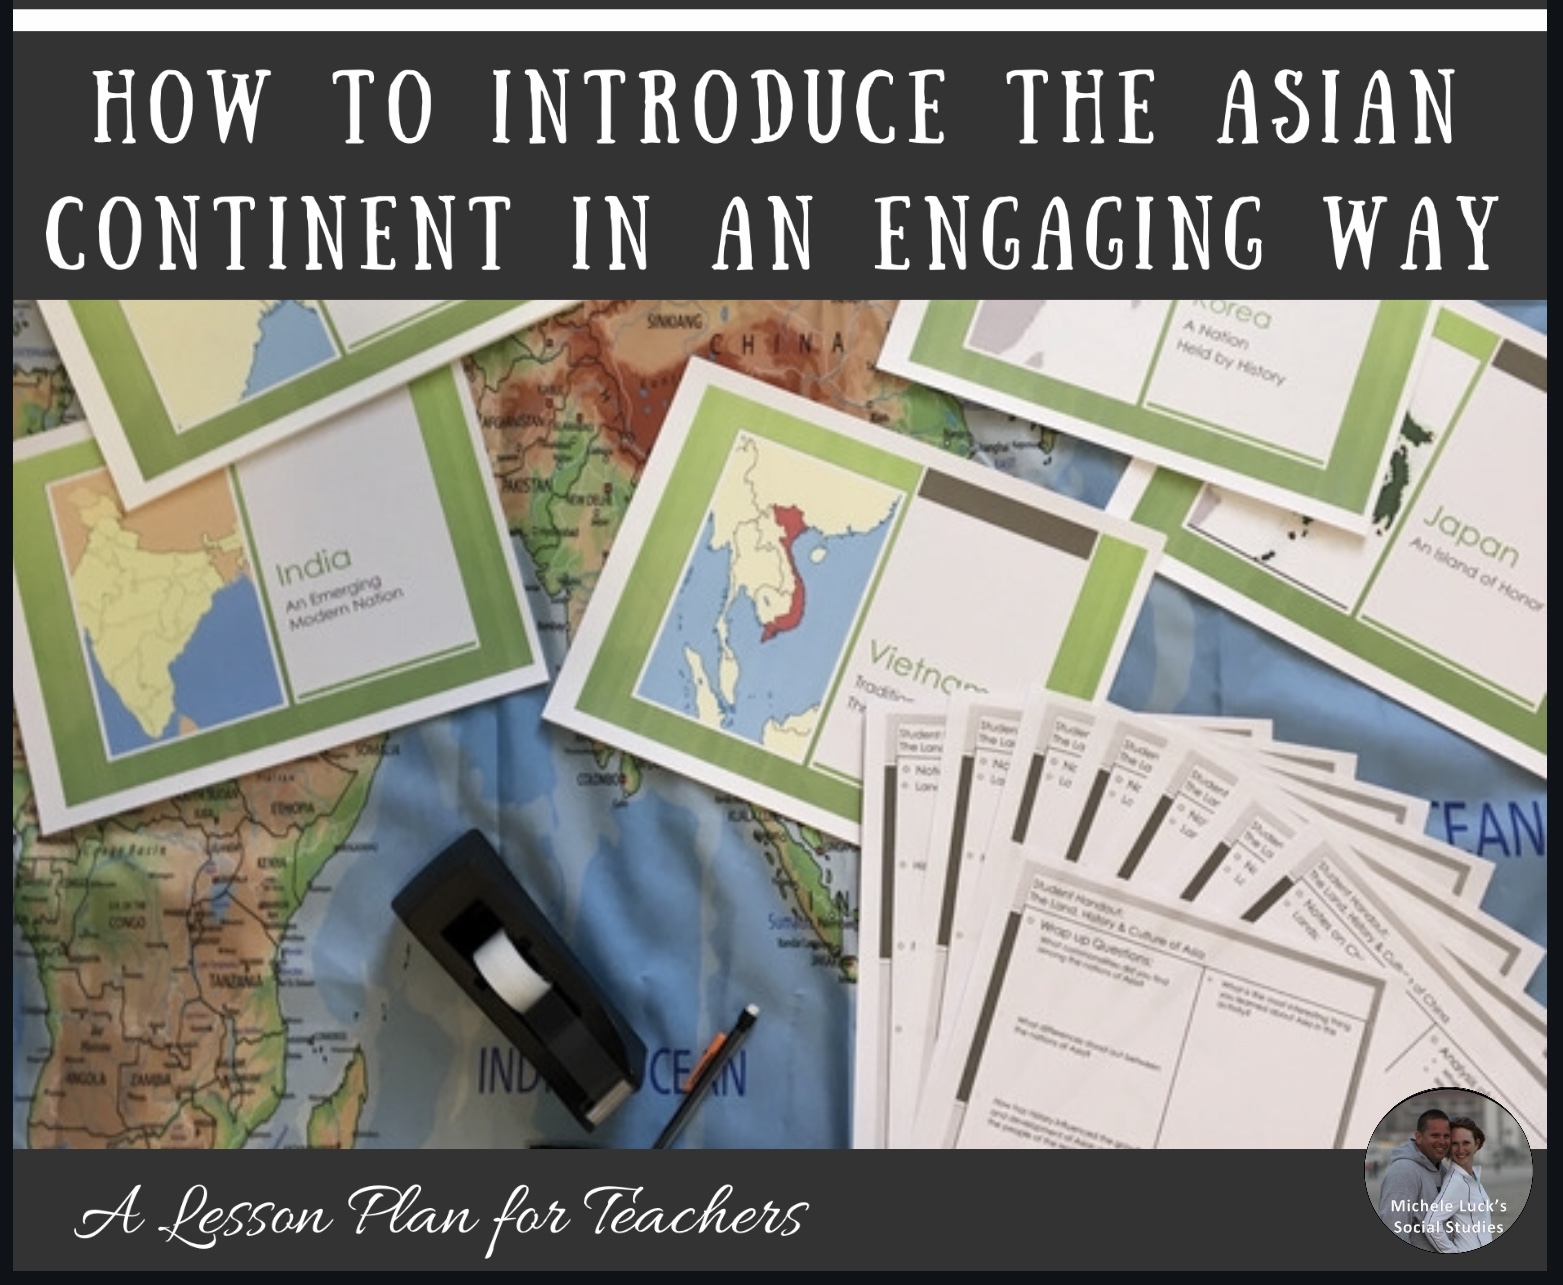 How to Introduce the Asian Continent in an Engaging Way